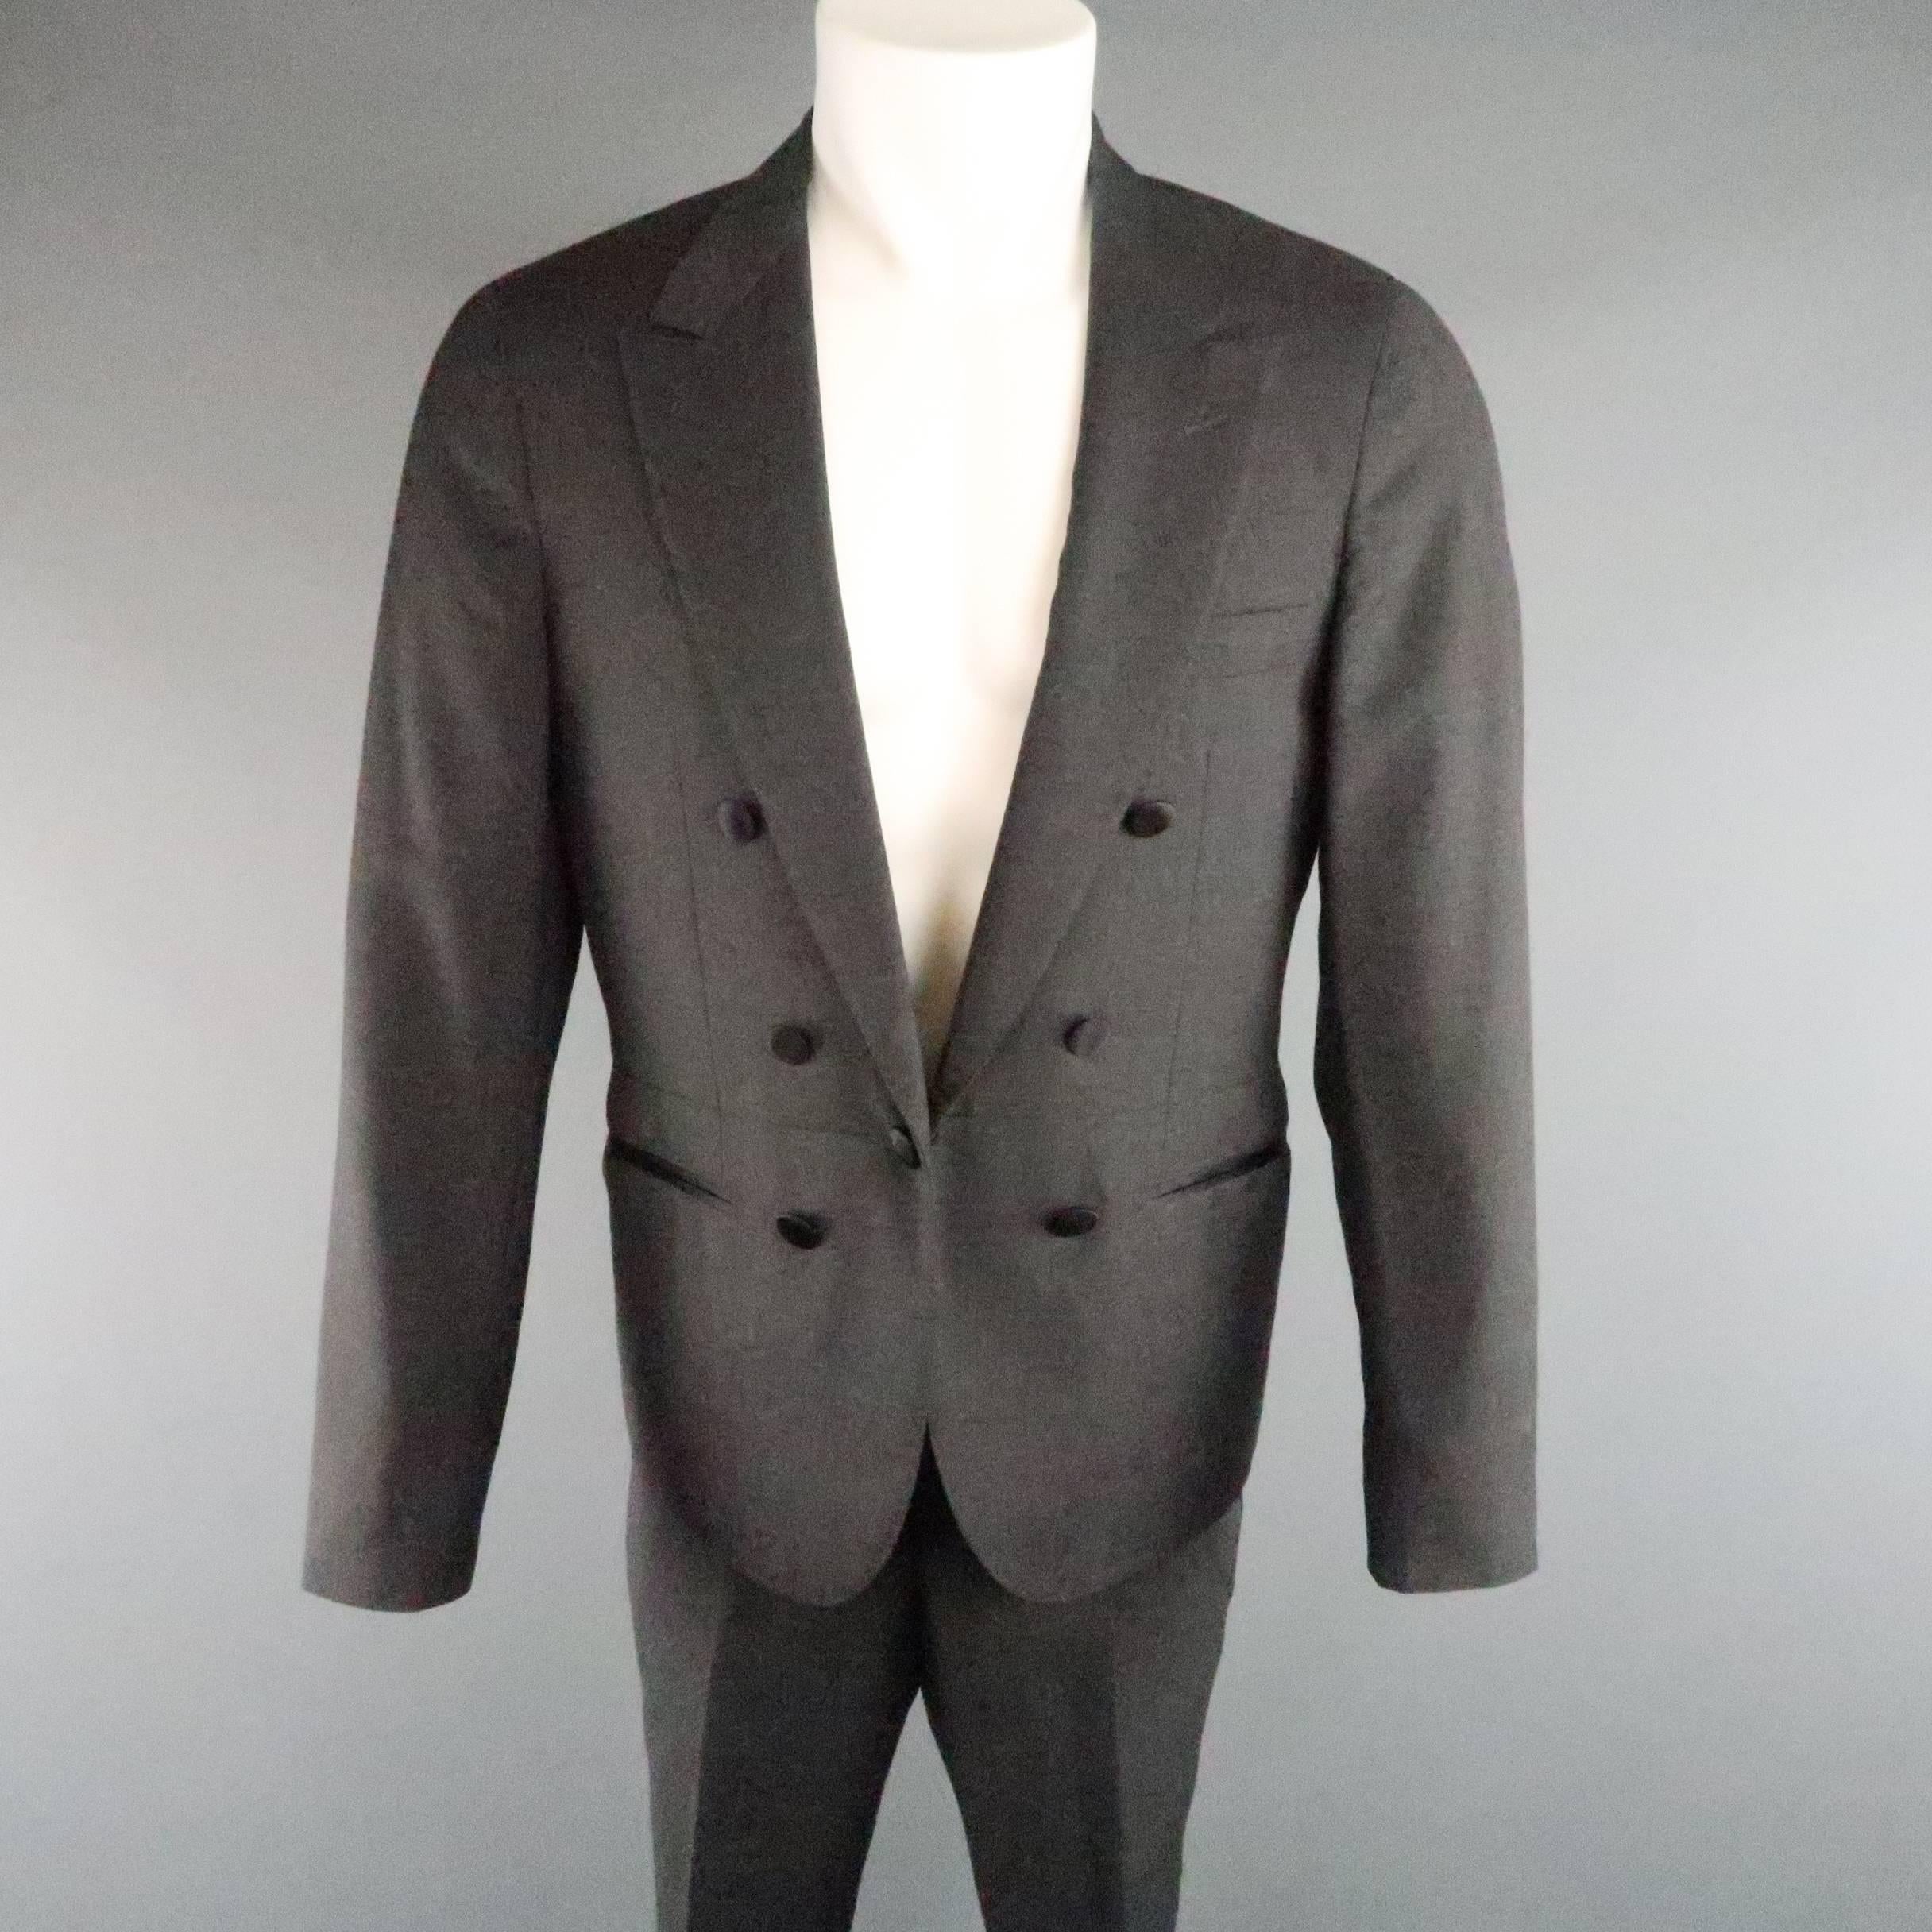 LANVIN tuxedo style suit comes in dark gray wool and includes a peak lapel dinner jacket with black satin buttons and matching flat front trousers. button closure has one side replaced with a regular button. As-Is. Made in Italy.
 
Good Pre-Owned